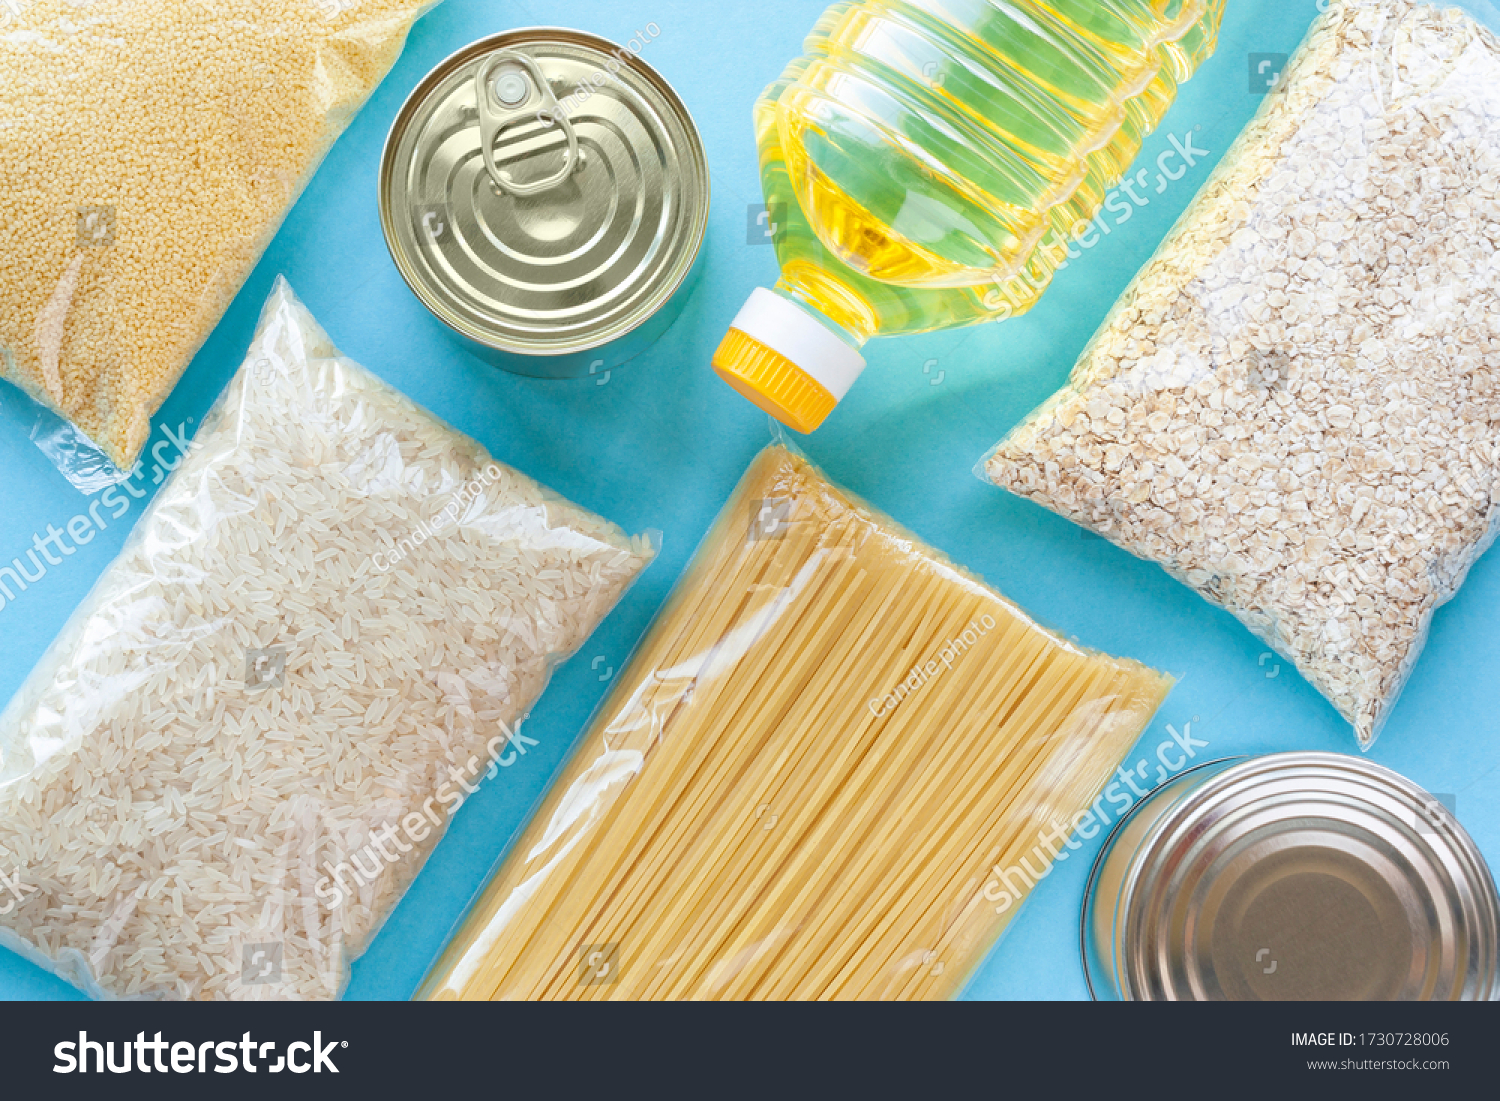 Set of grocery items from pasta, rice, oatmeal, couscous, oil and canned food on blue background. Food delivery, donation or stock provision concept. Top view, flat lay. #1730728006